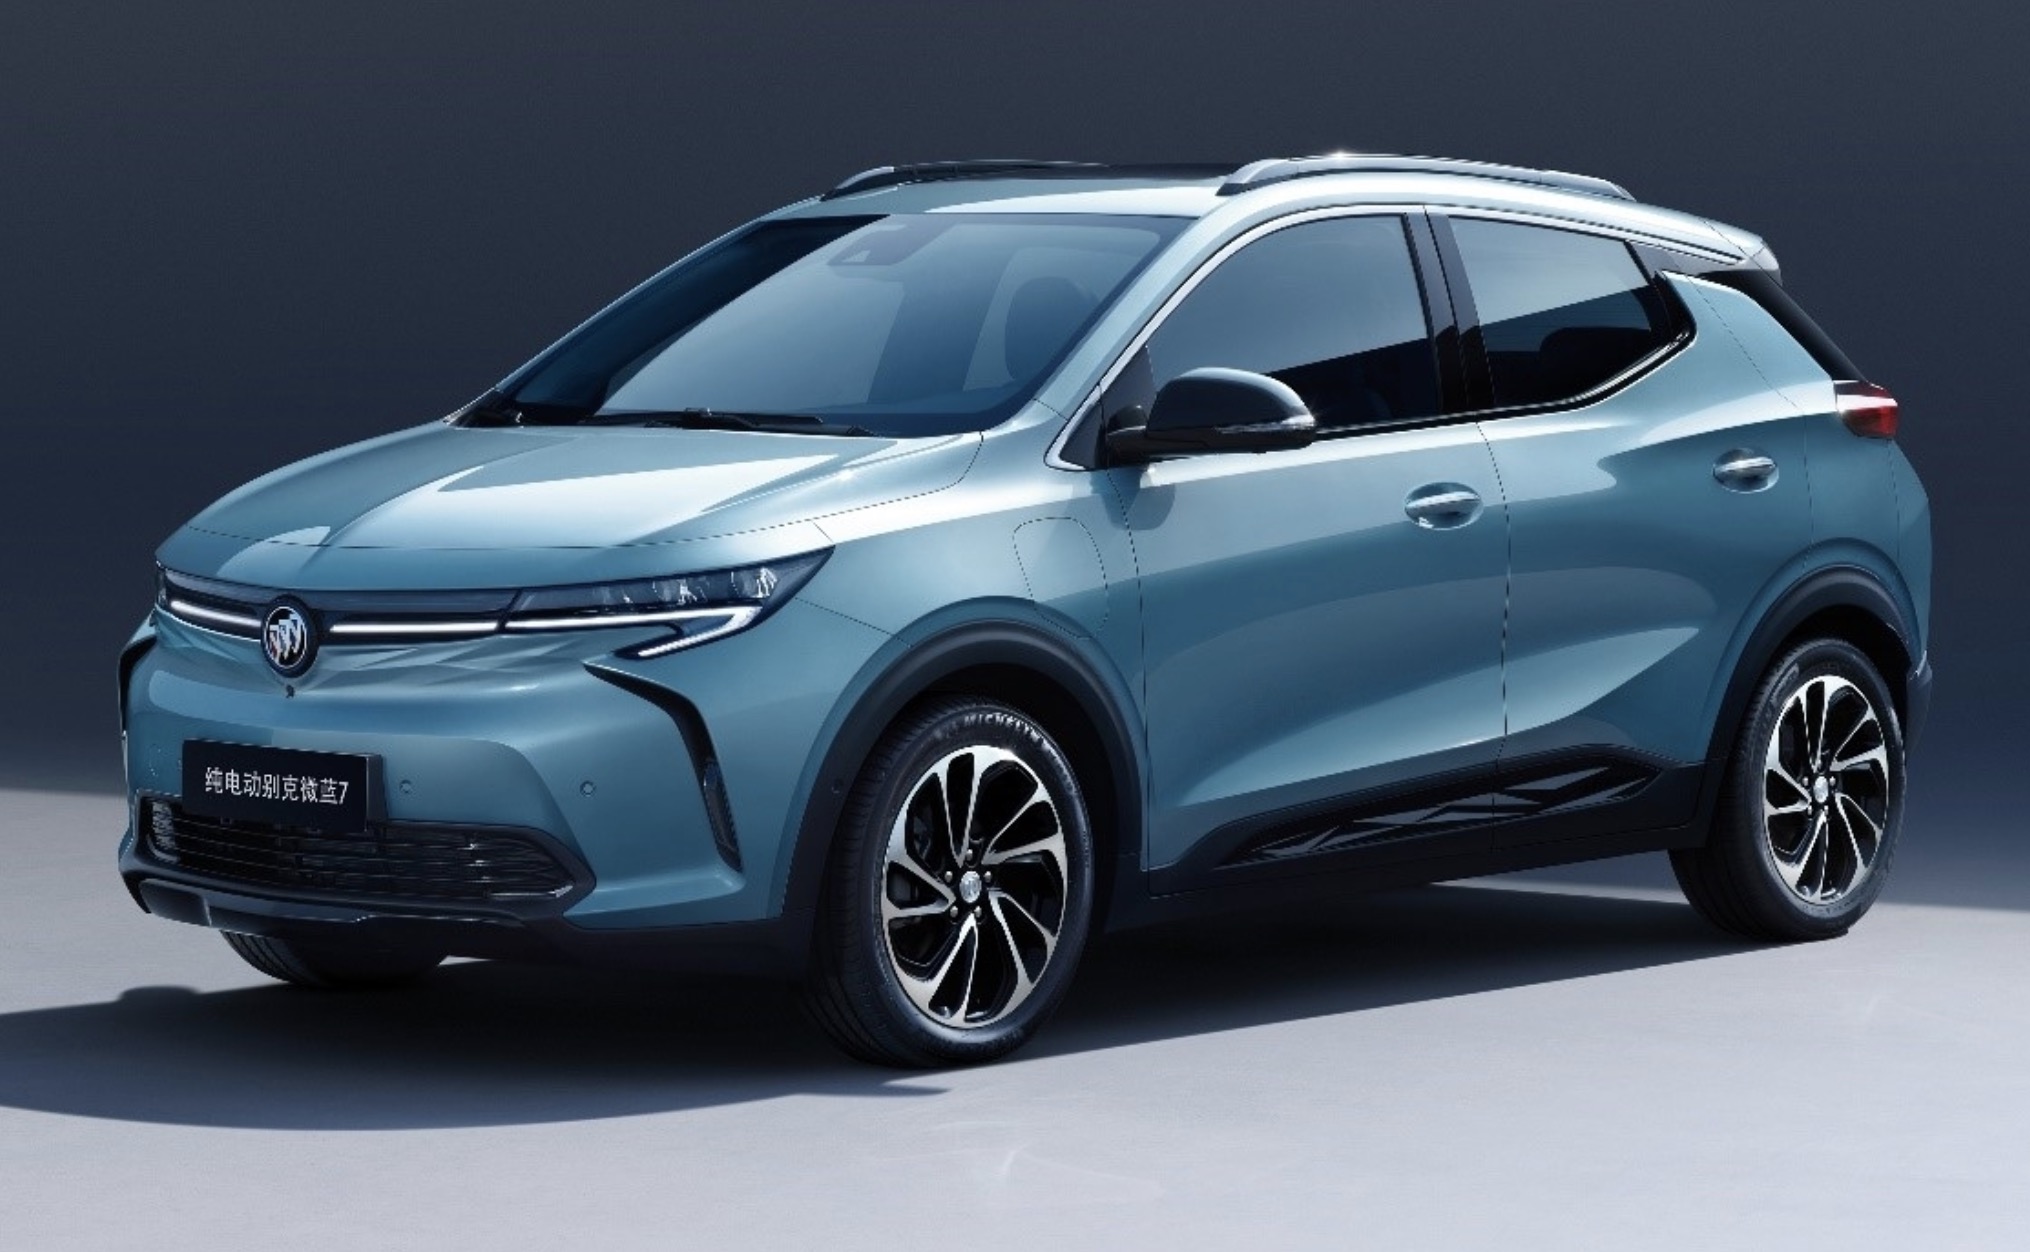 GM unveils Buick Velite 7 Electric SUV, gives us an idea of Bolt EUV